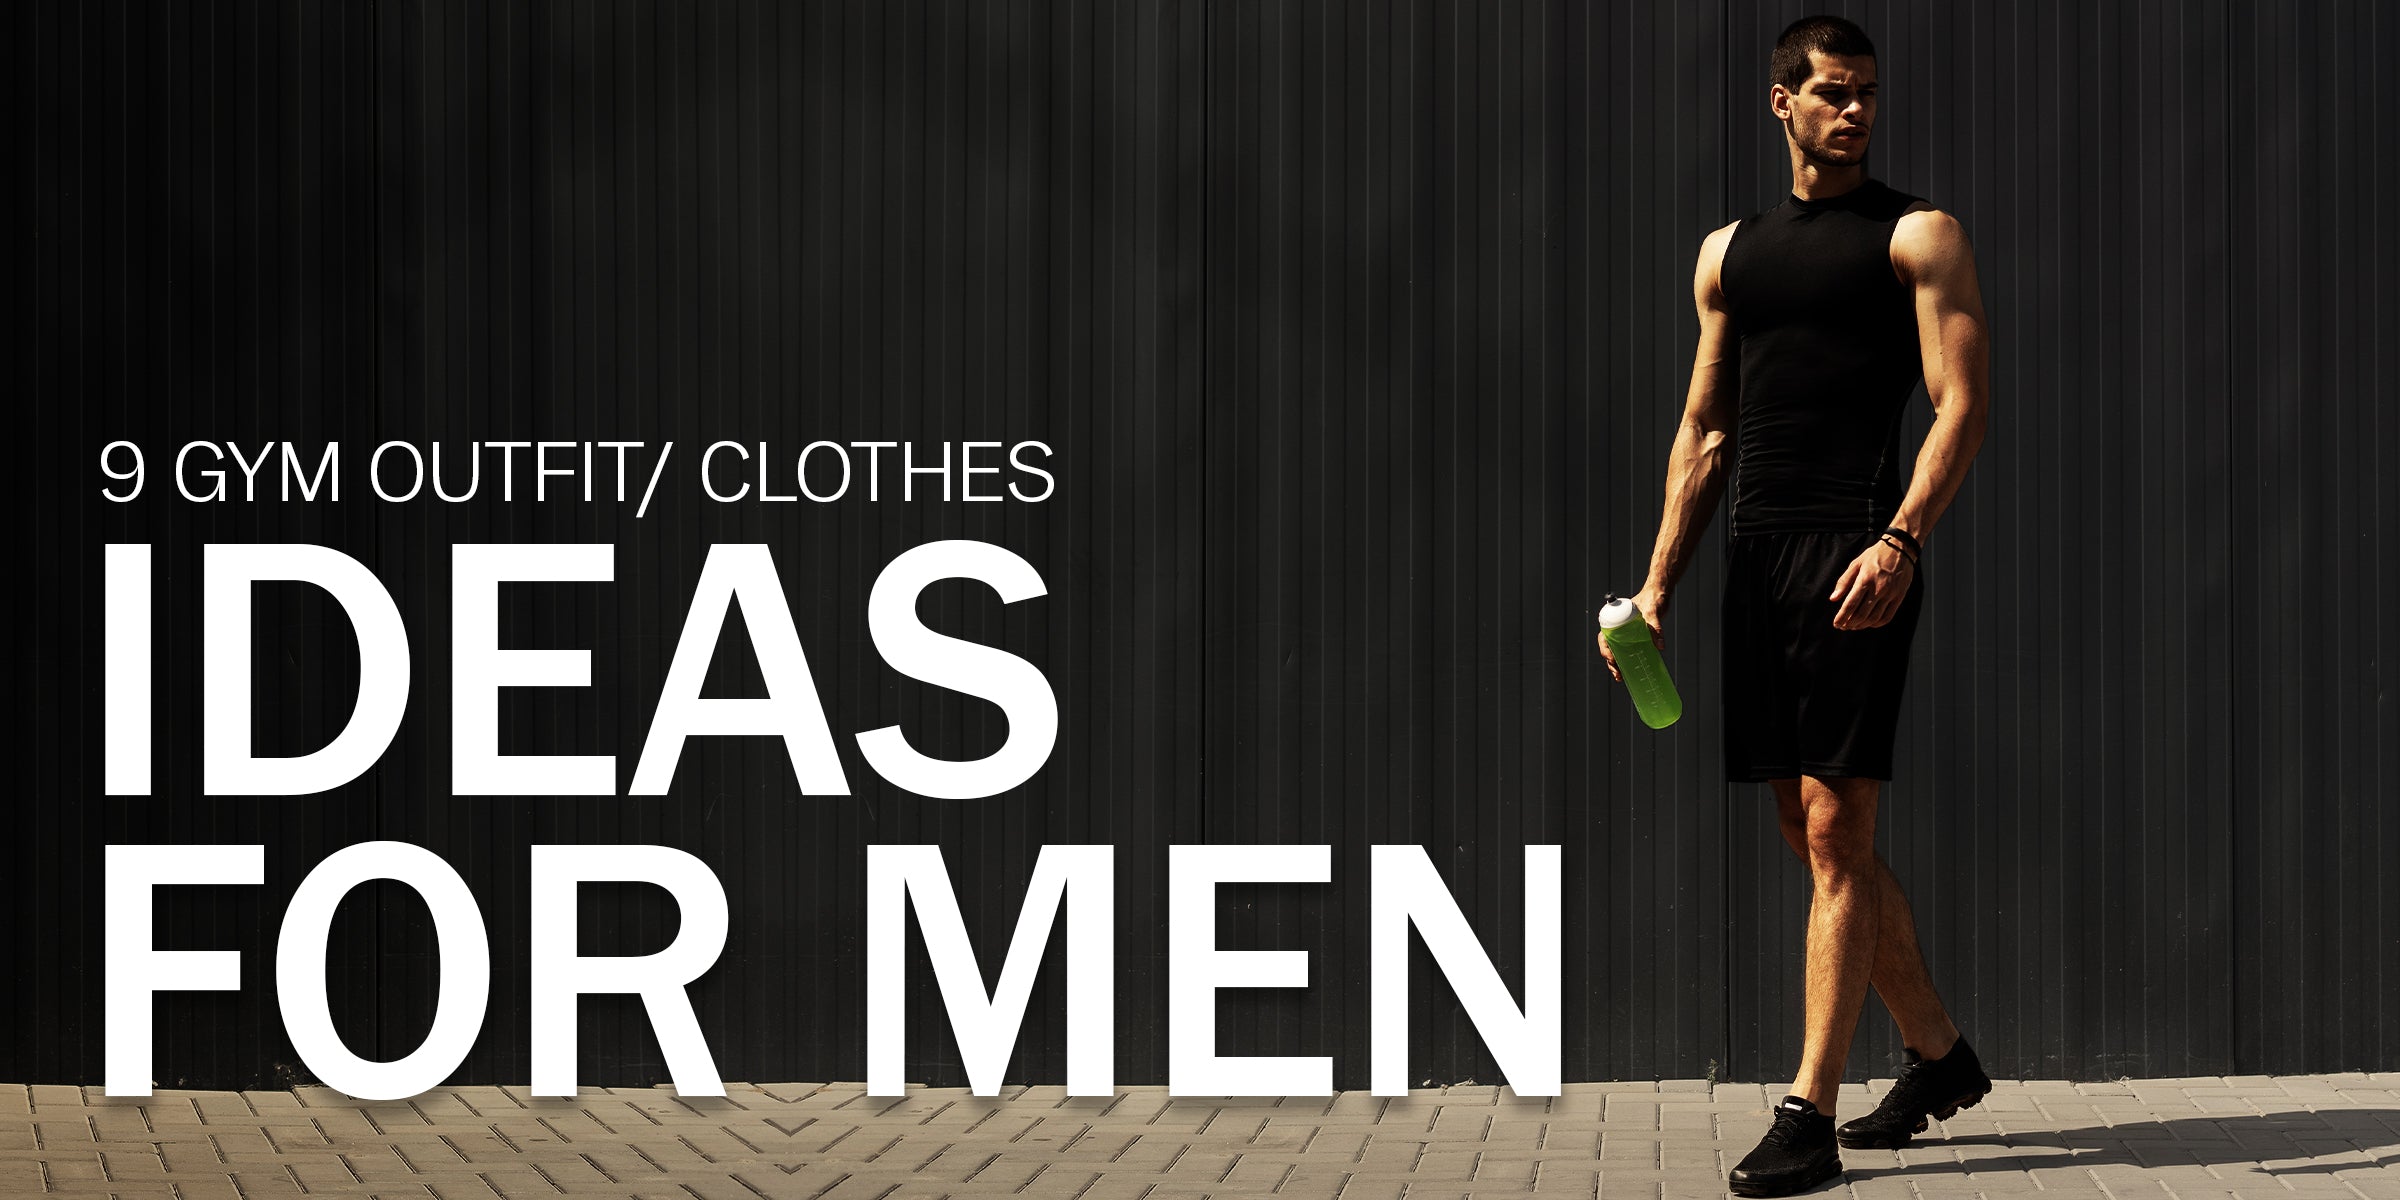 9 Gym Outfit/ clothes Ideas For Men – GetMyMettle